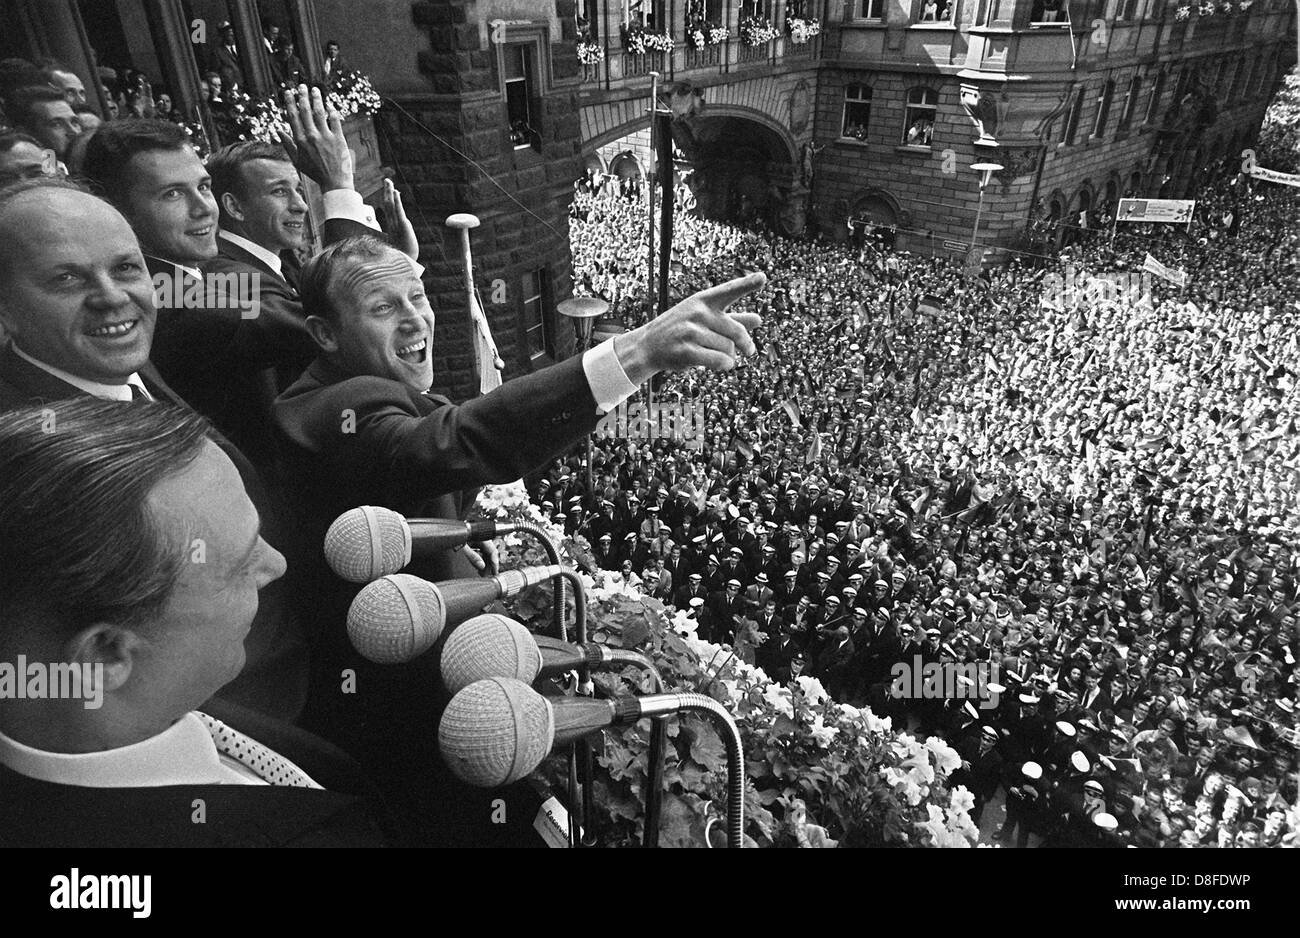 An enthusiastic crowd of people at the Frankfurt Roemerberg are celebrating the German players who are standing on the balcony of the townhall on July 31st 1966. In the front Frankfurt's Mayor Willi Brundert, in the middle with pointing index finger Uwe Seeler and behind him Franz Beckenbauer. Host country England had won the 1966 FIFA World Cup final 4:2 after extra time against Germany. Stock Photo